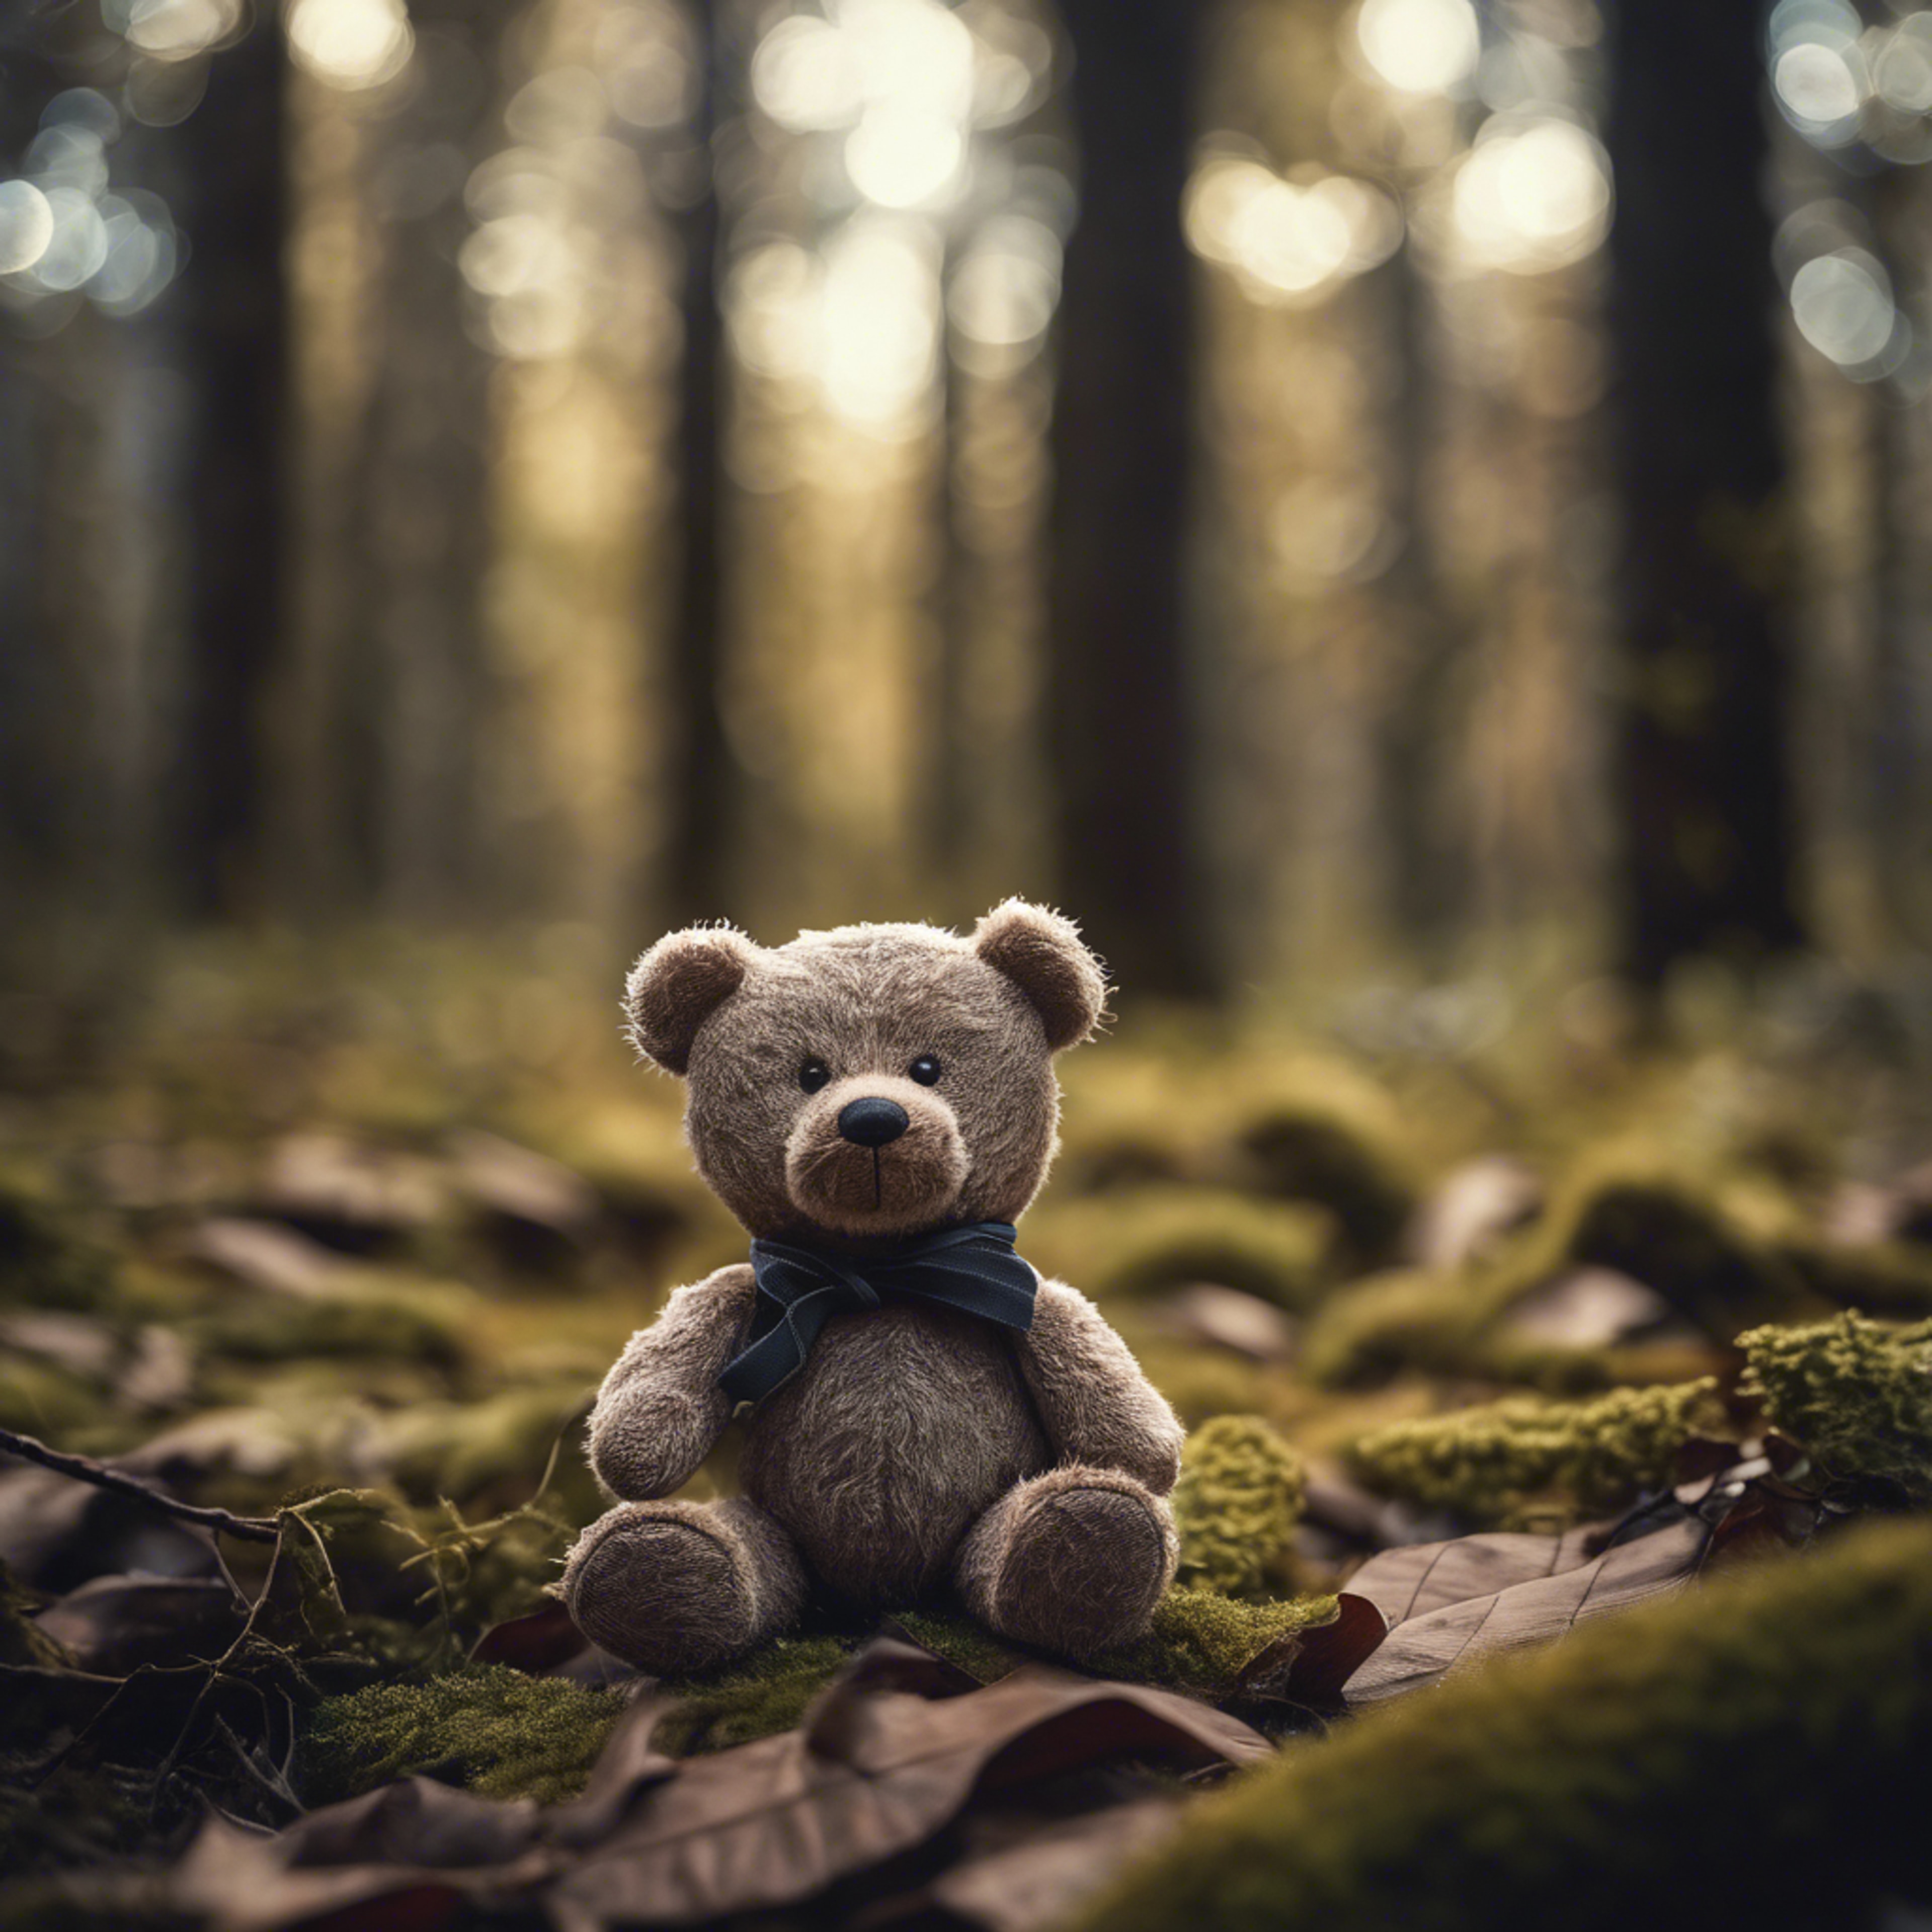 A teddy bear lost and alone in a dark forest. Обои[4d225efade314682baea]